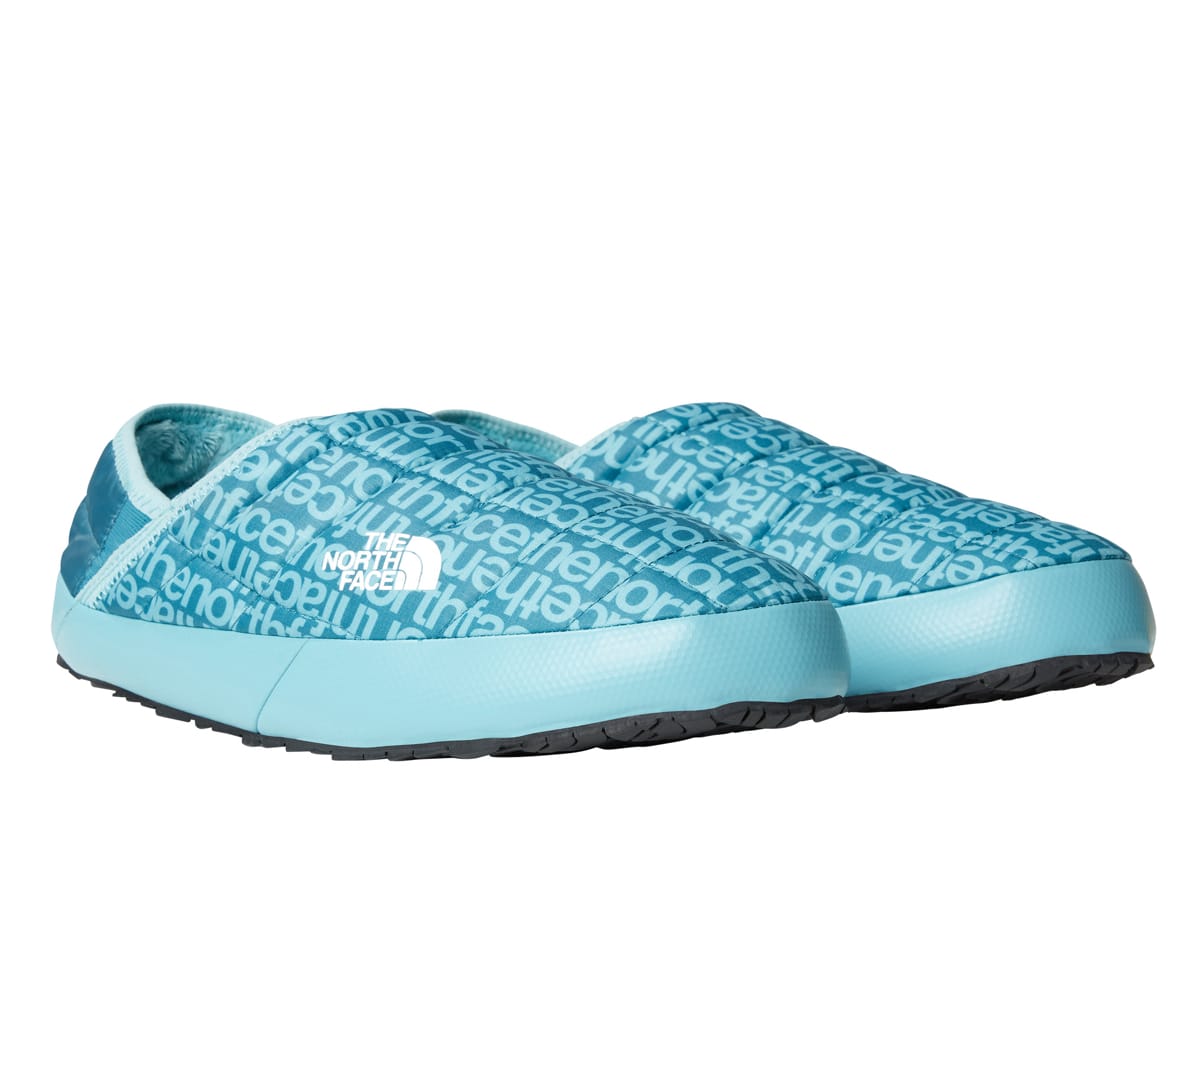 The North Face M Thermoball Traction Mule V Blue/Blue